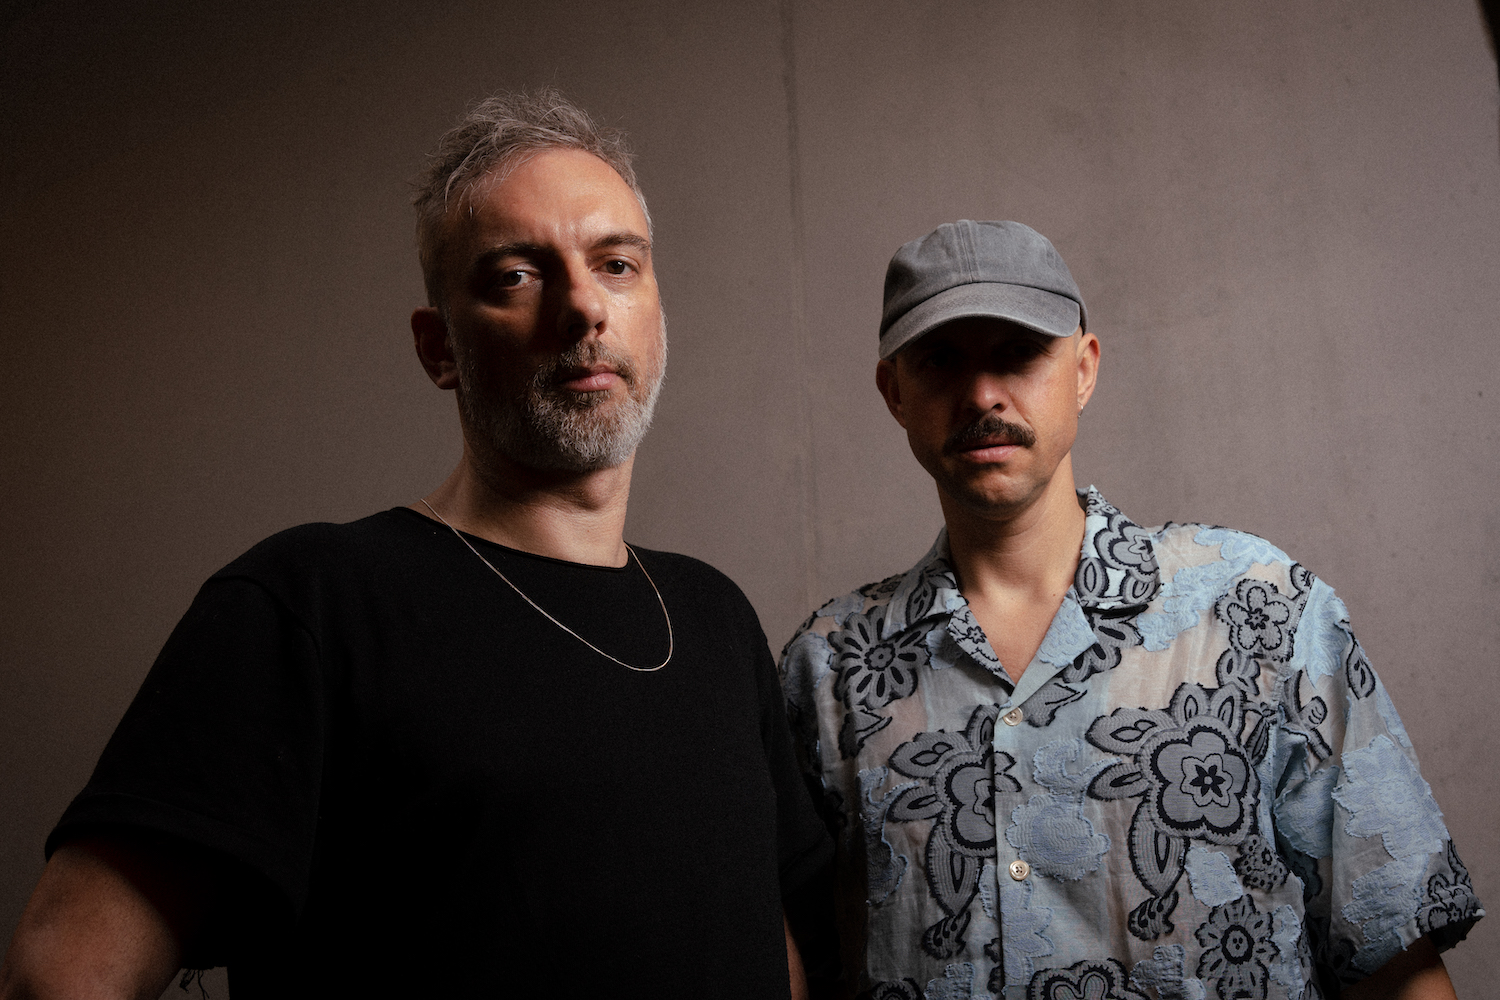 Frankey & Sandrino Return to Innervisions with ‘Memories’ EP